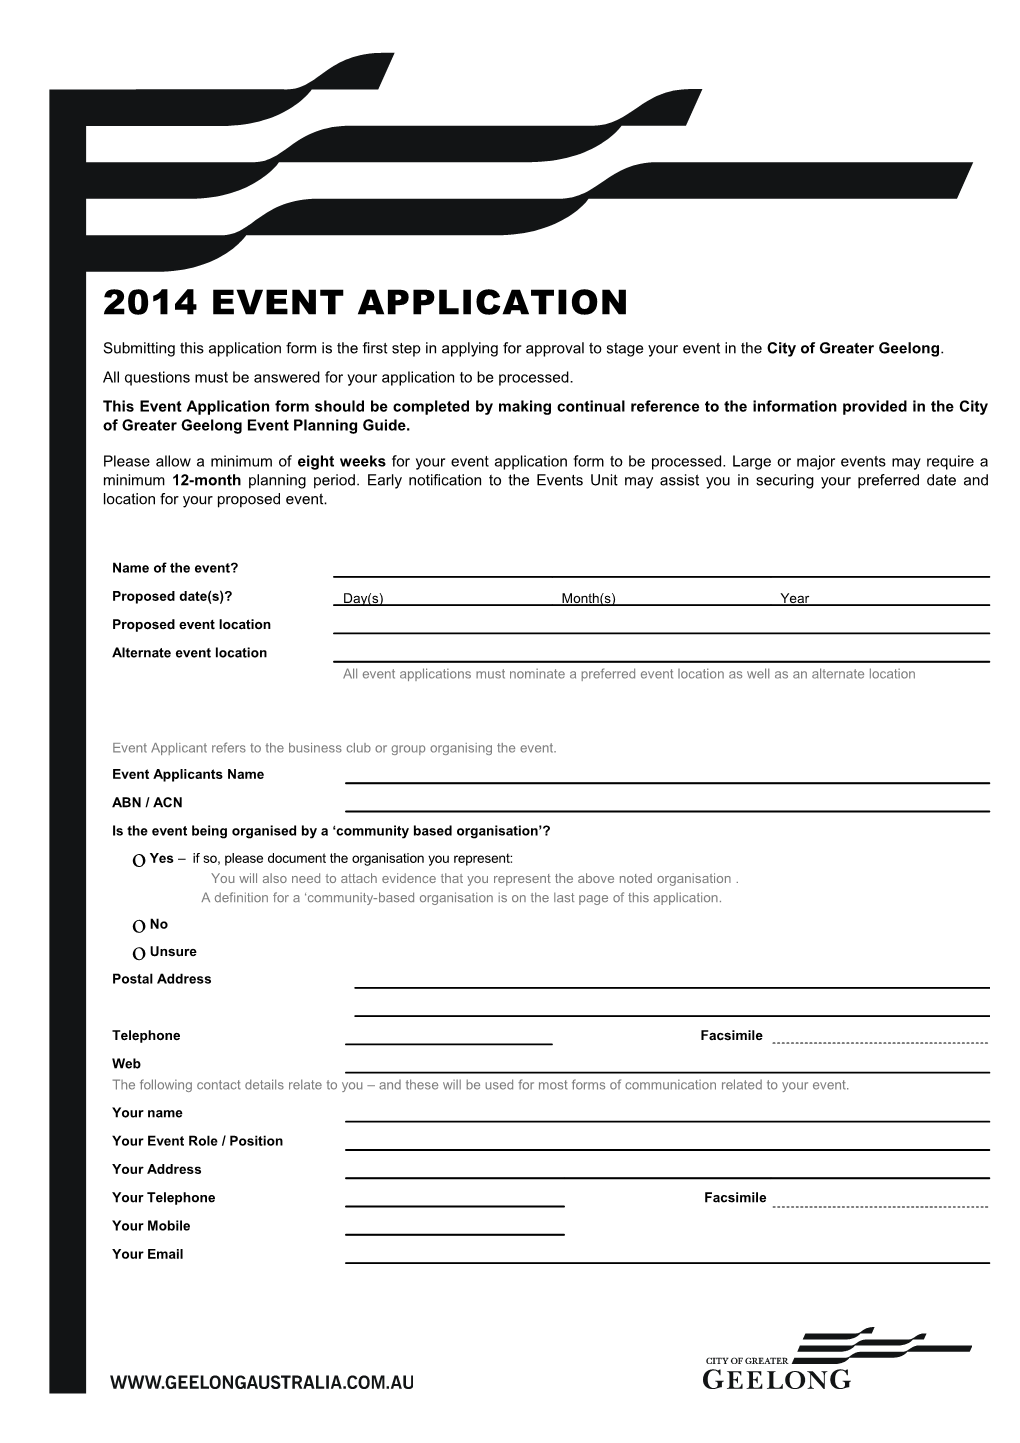 Event Application Form s1